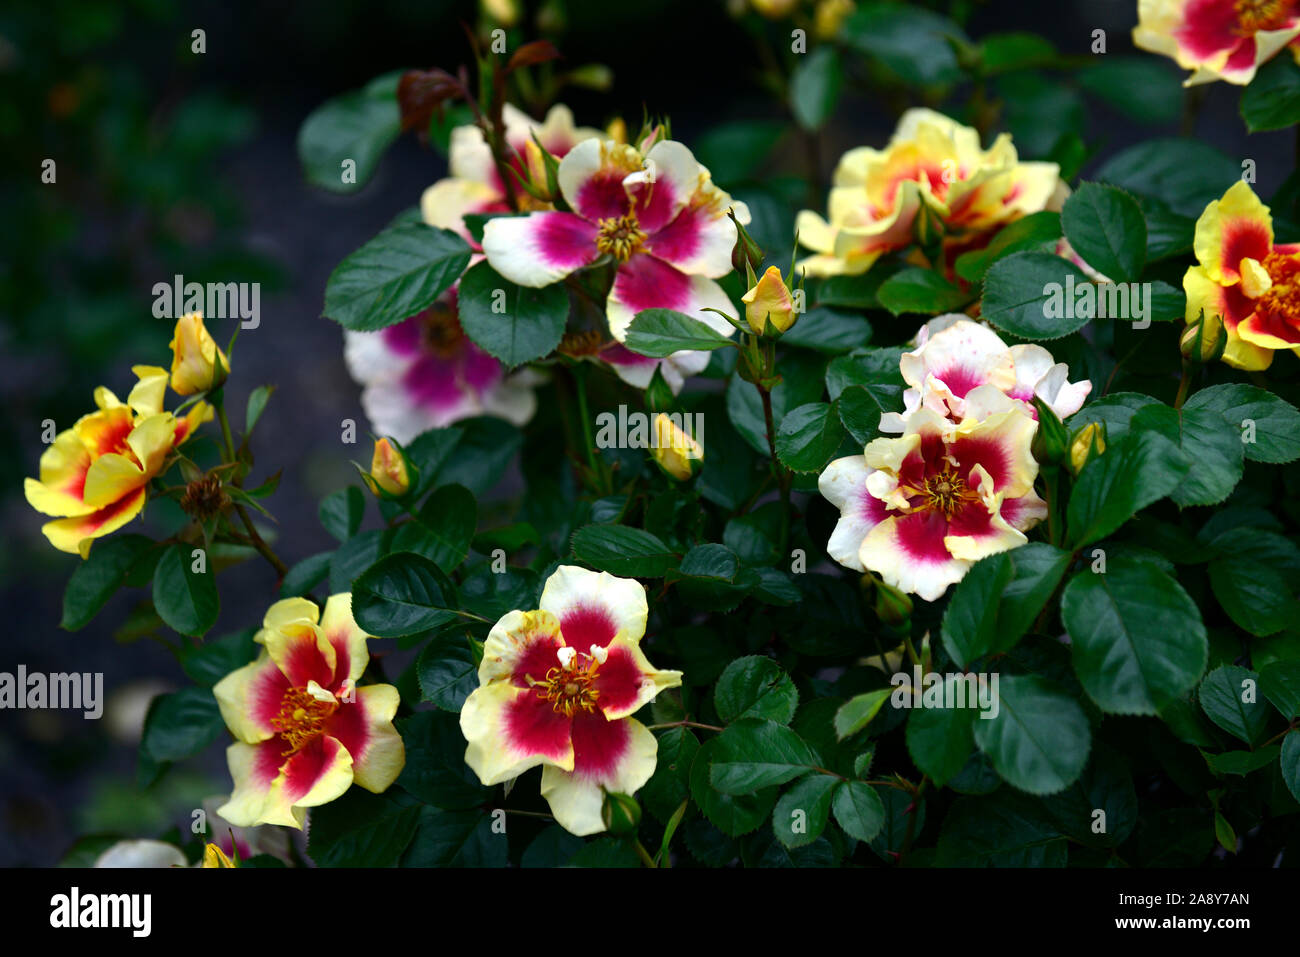 rm Floral,flowering,flowers,roses,yellow rose with red eye,persica rose,rosa eye of the tiger,rose eye of the tiger Stock Photo